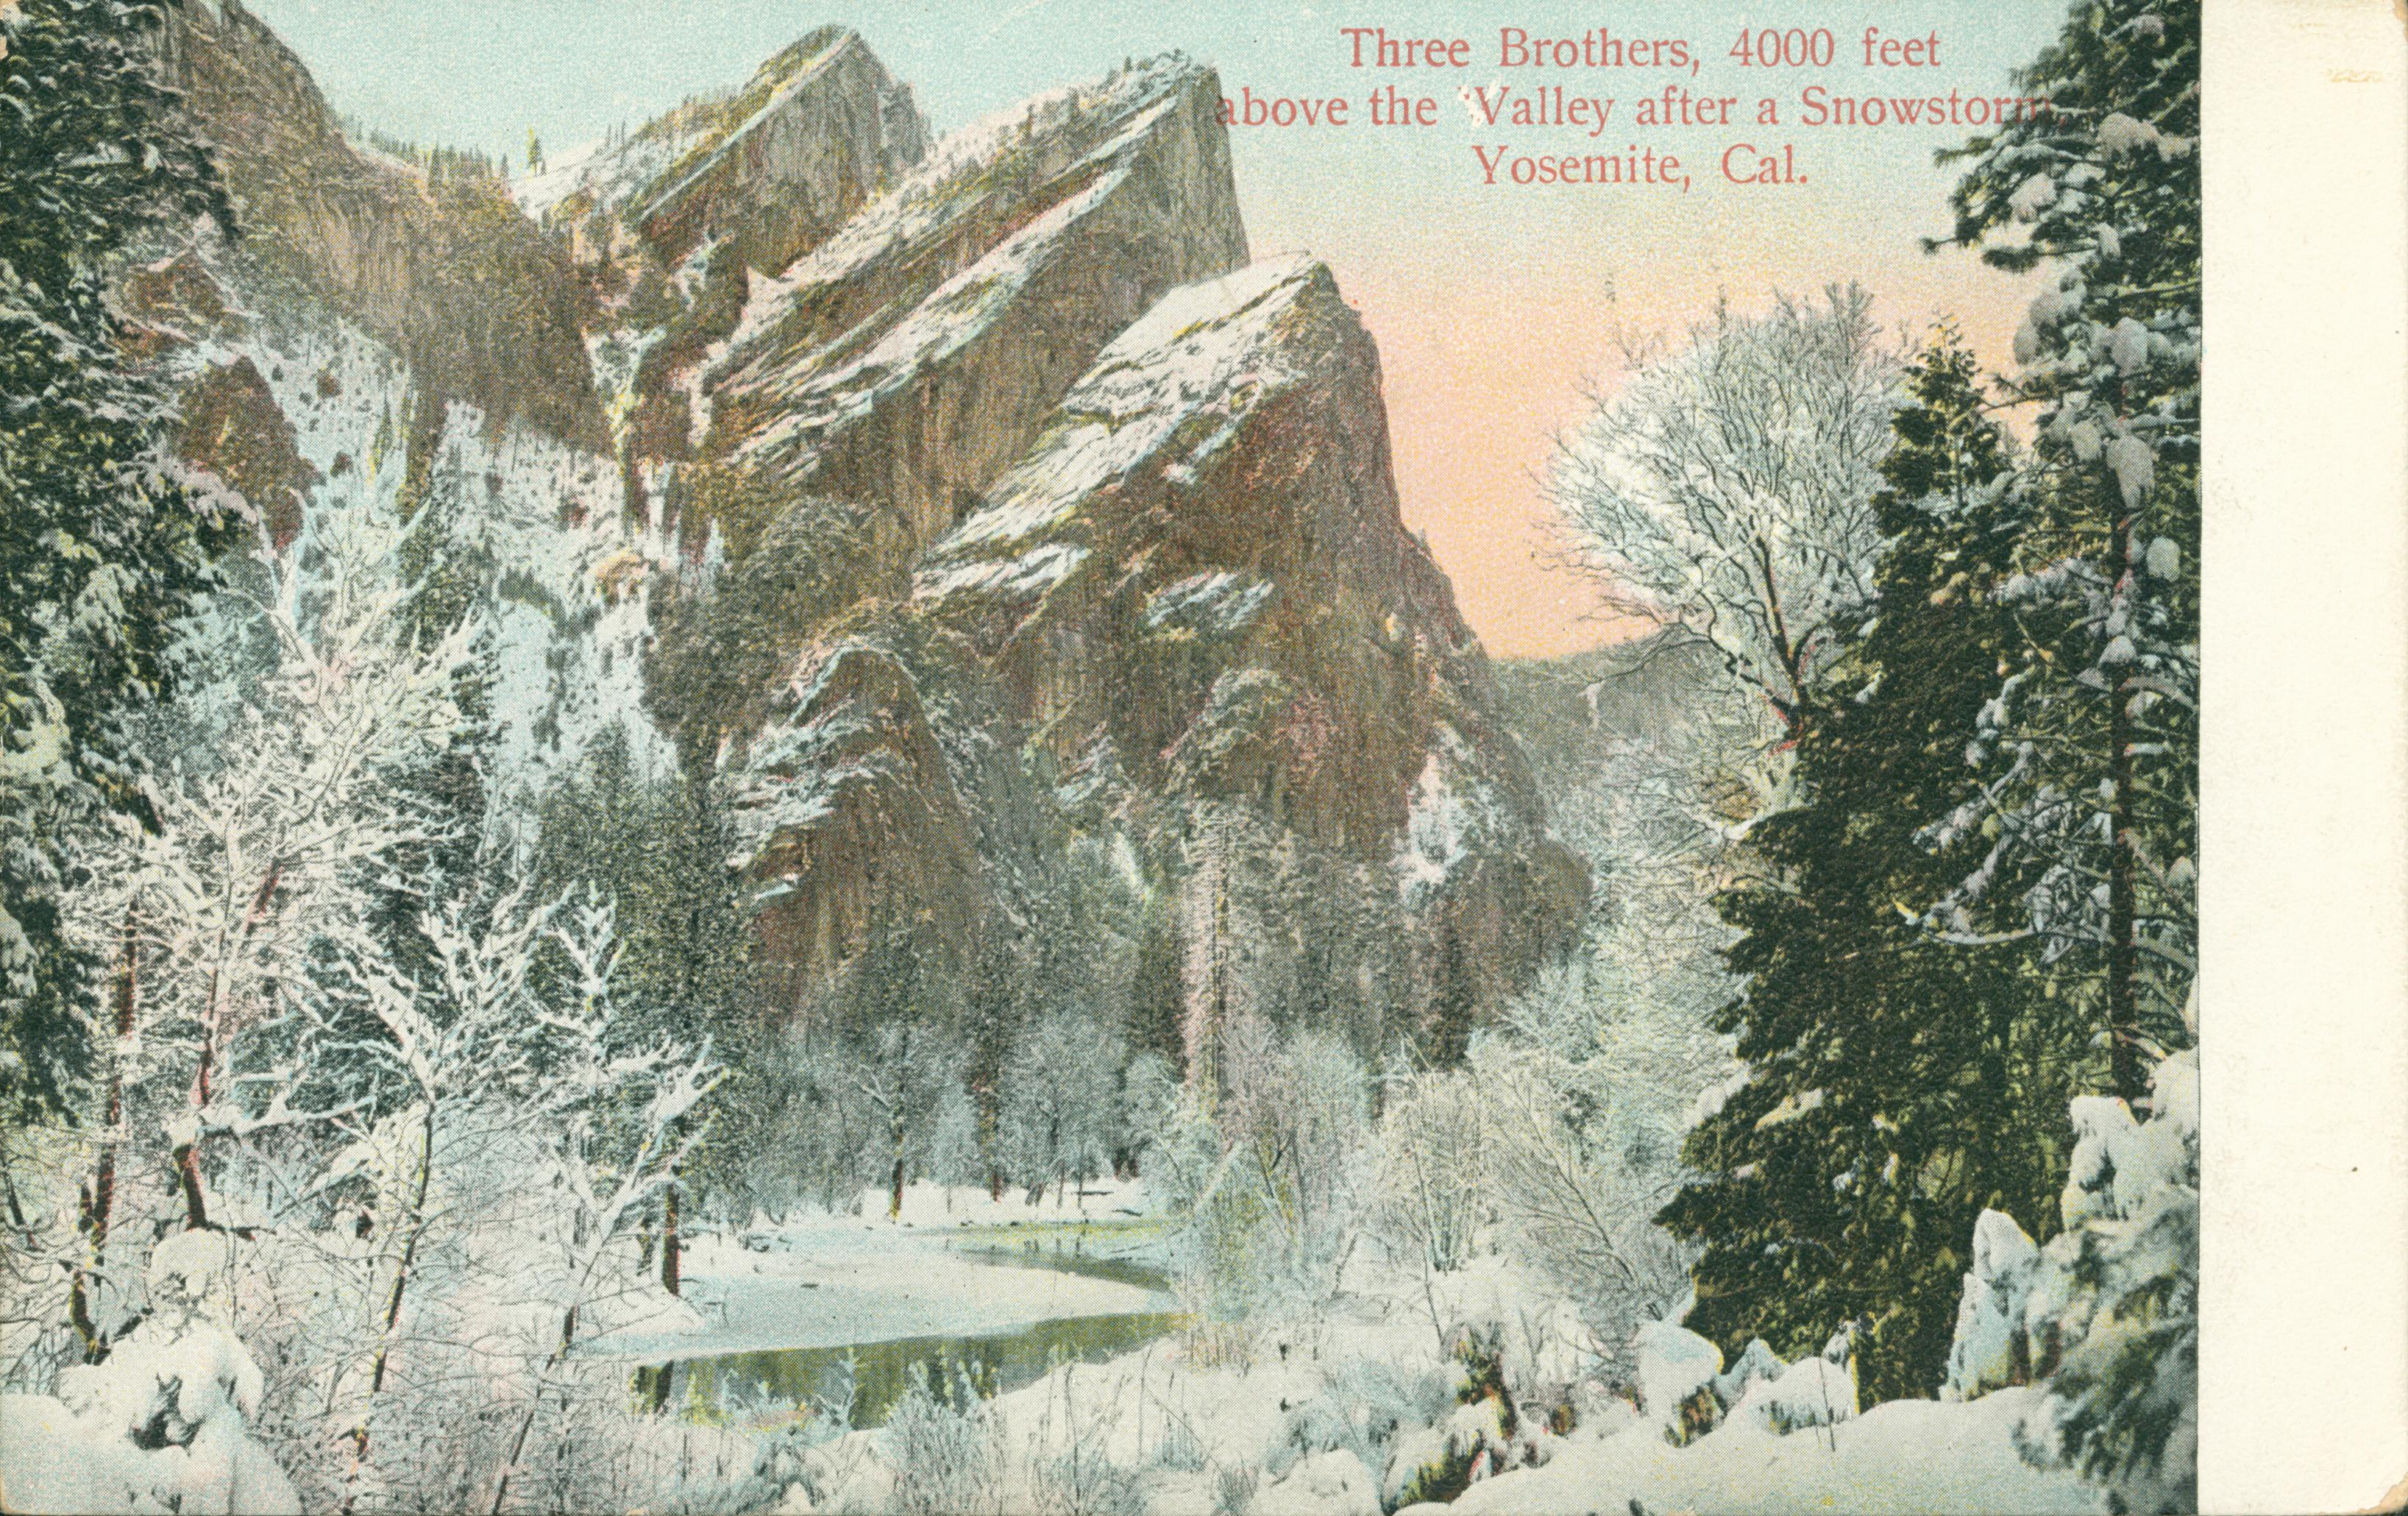 Shows the Three Brothers rock formation with trees covered by snow, and a river in the foreground.